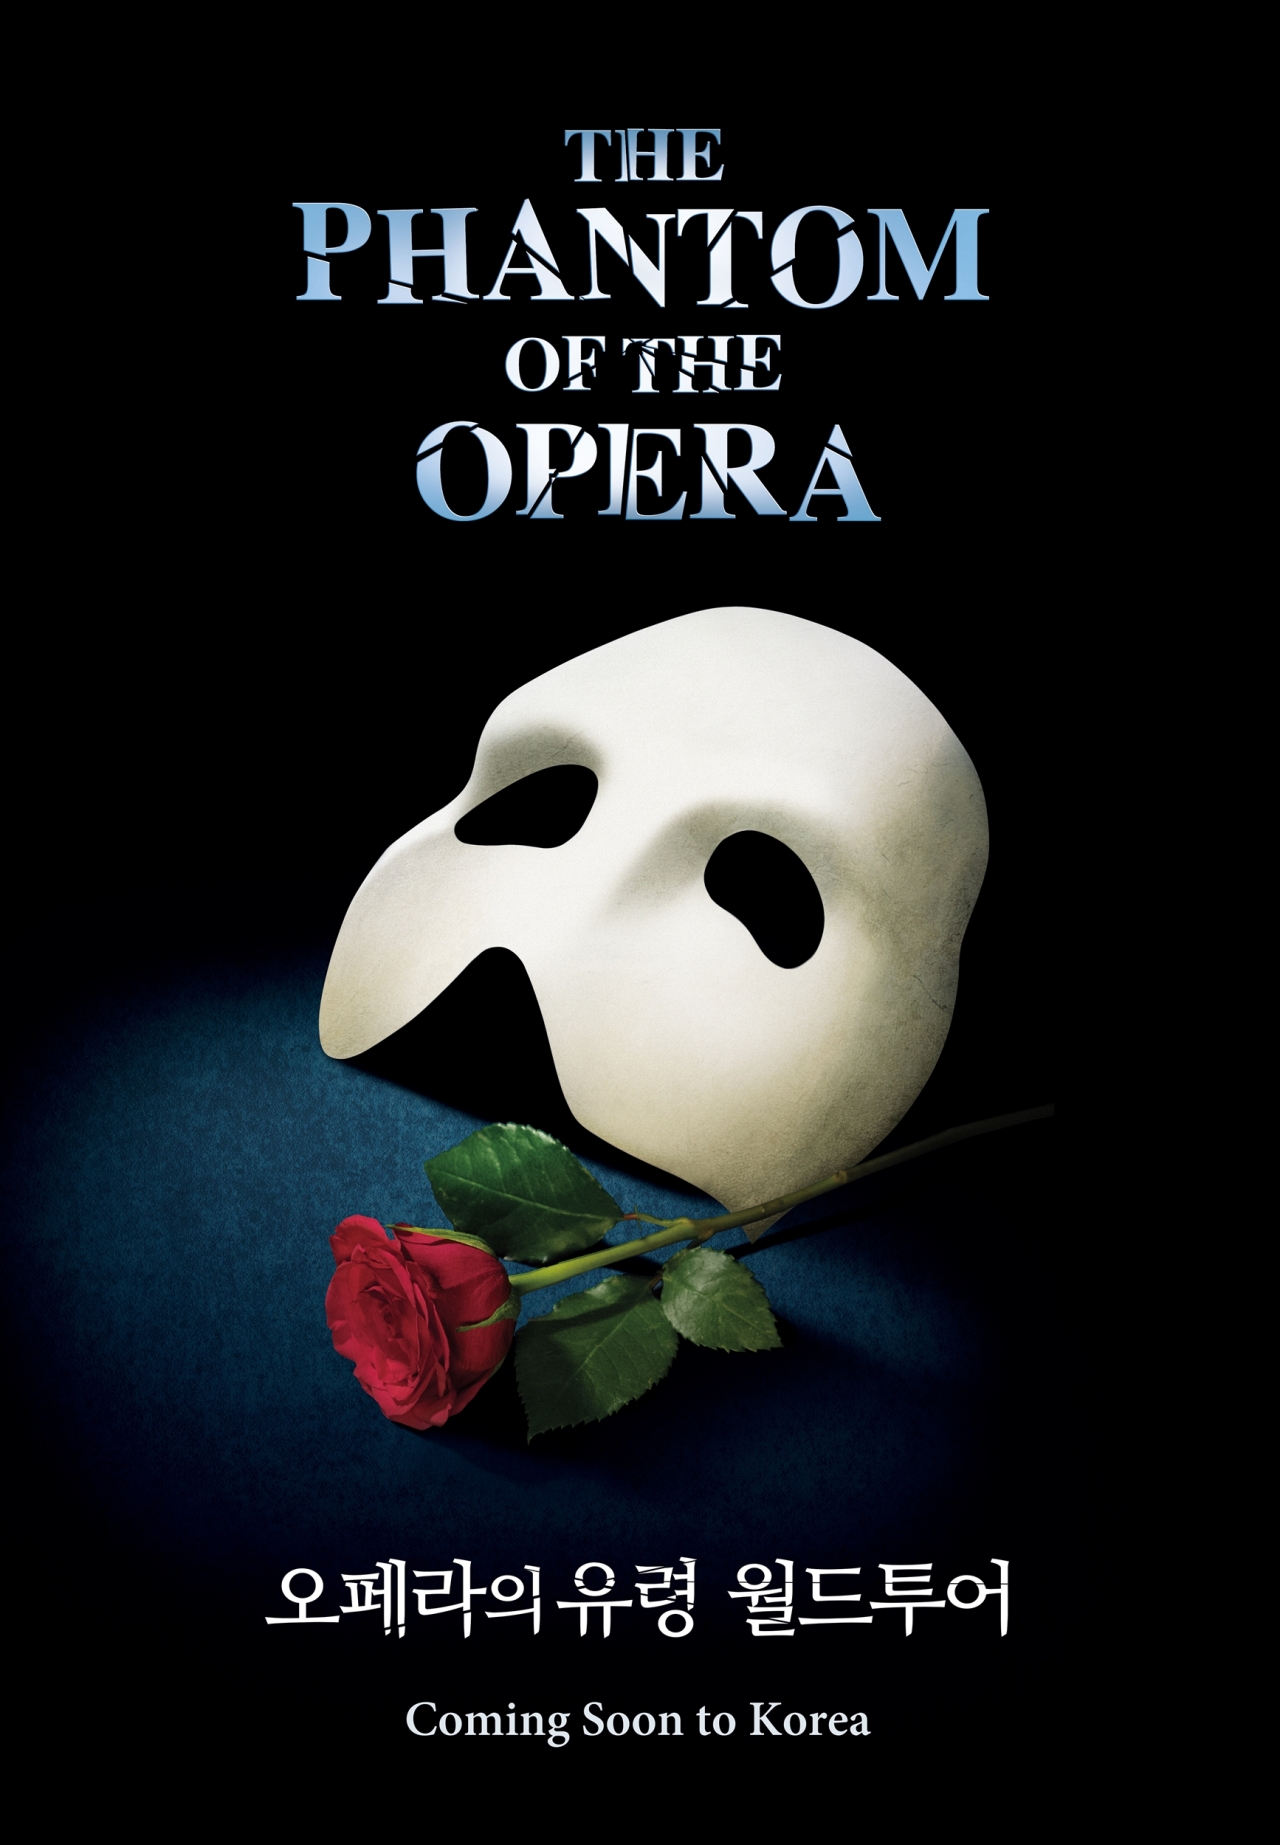 The poster for “The Phantom of the Opera” / S&Co.